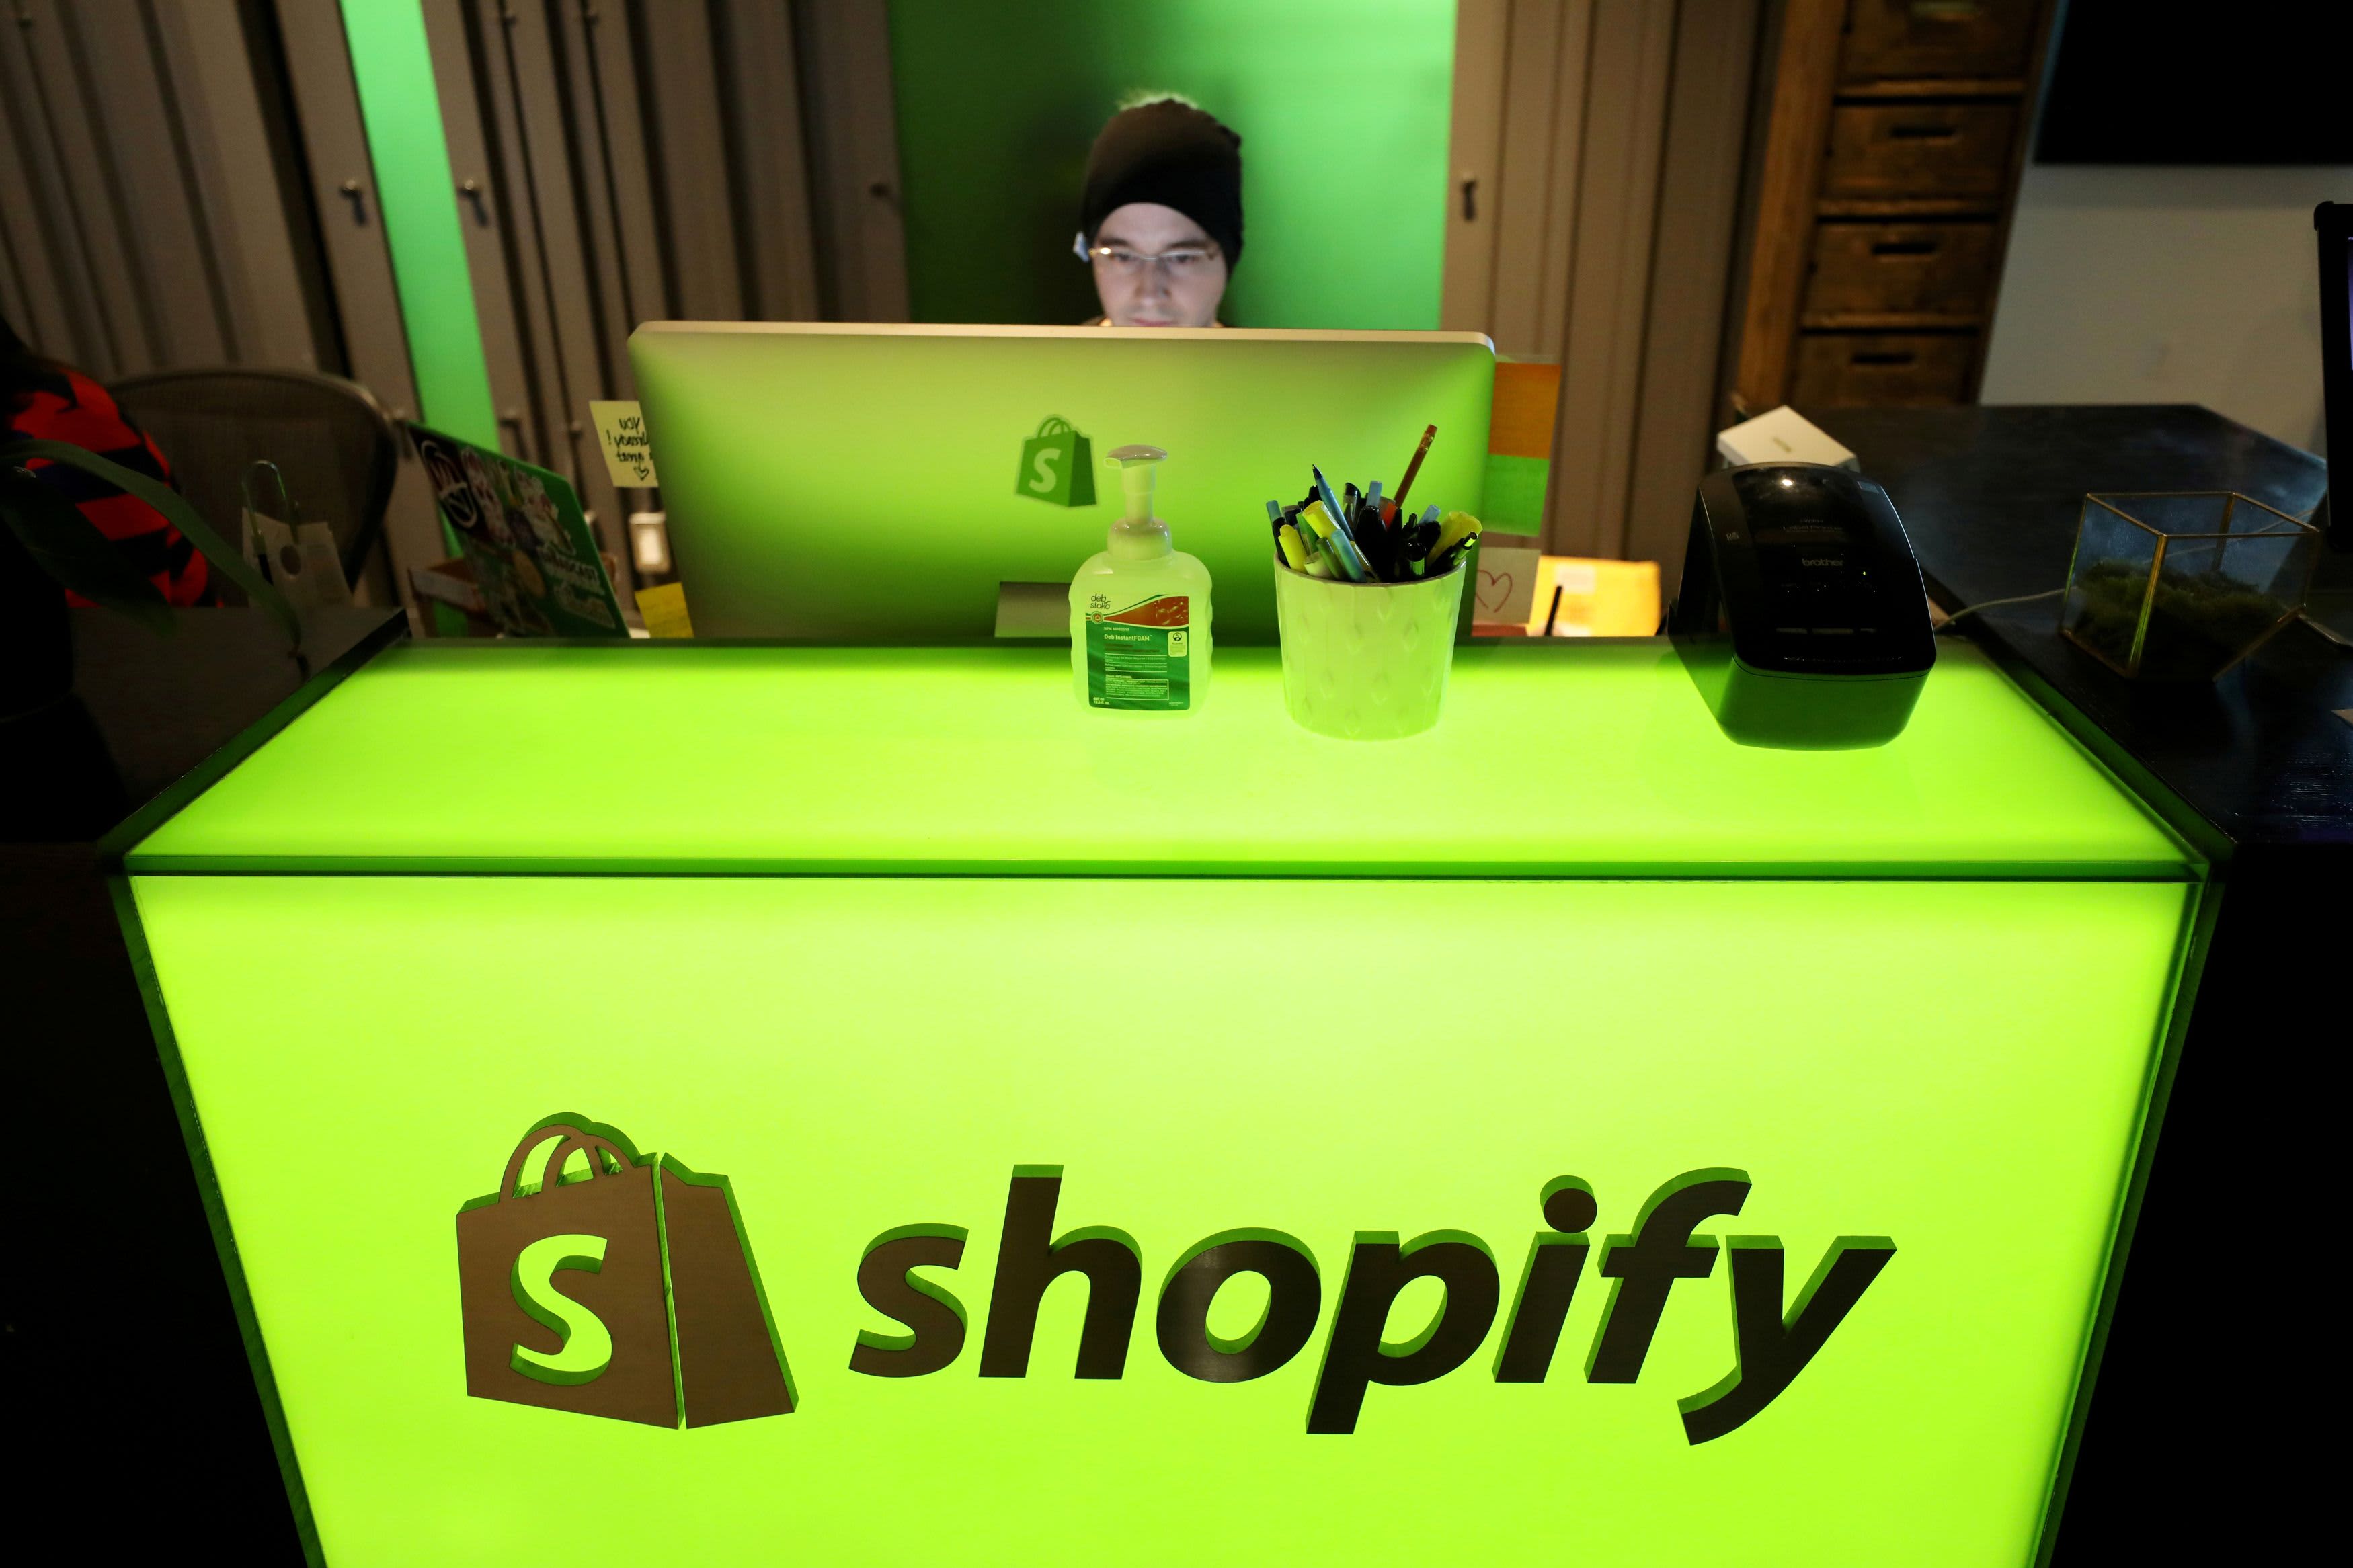 shopify cuts app store fees for developers on first $1 million in revenue